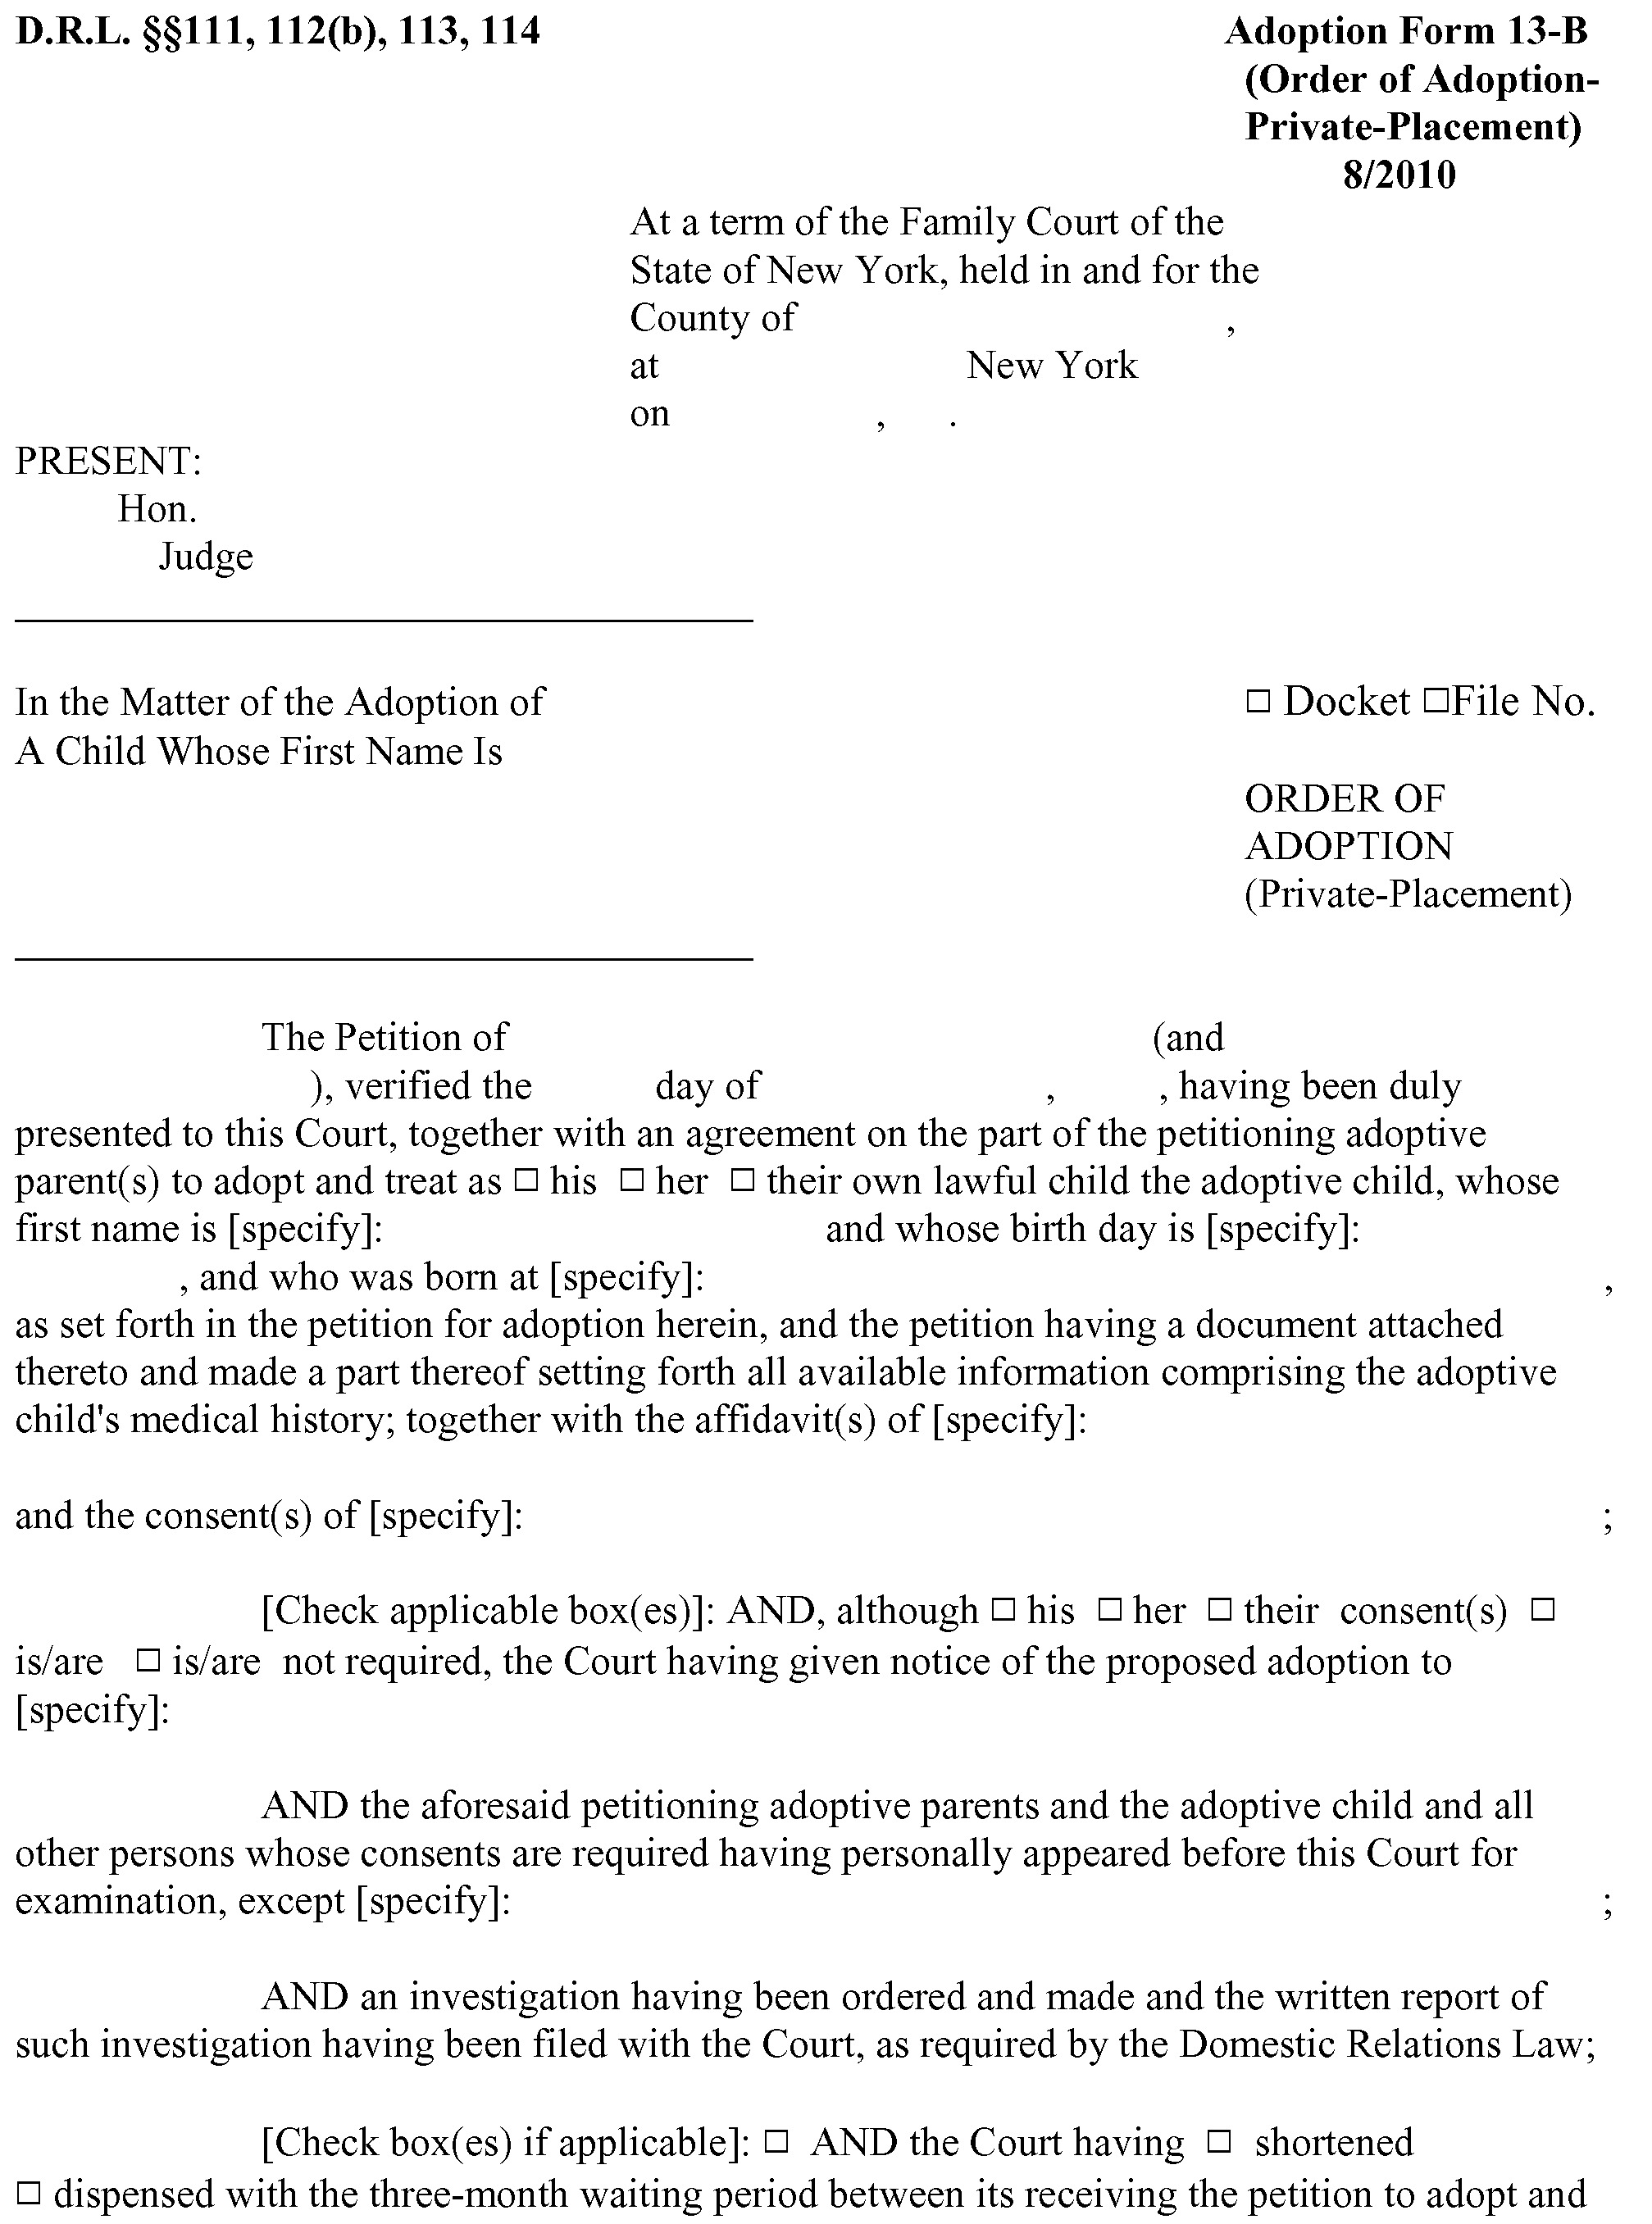 What are the laws regarding adoption in the state of New York?